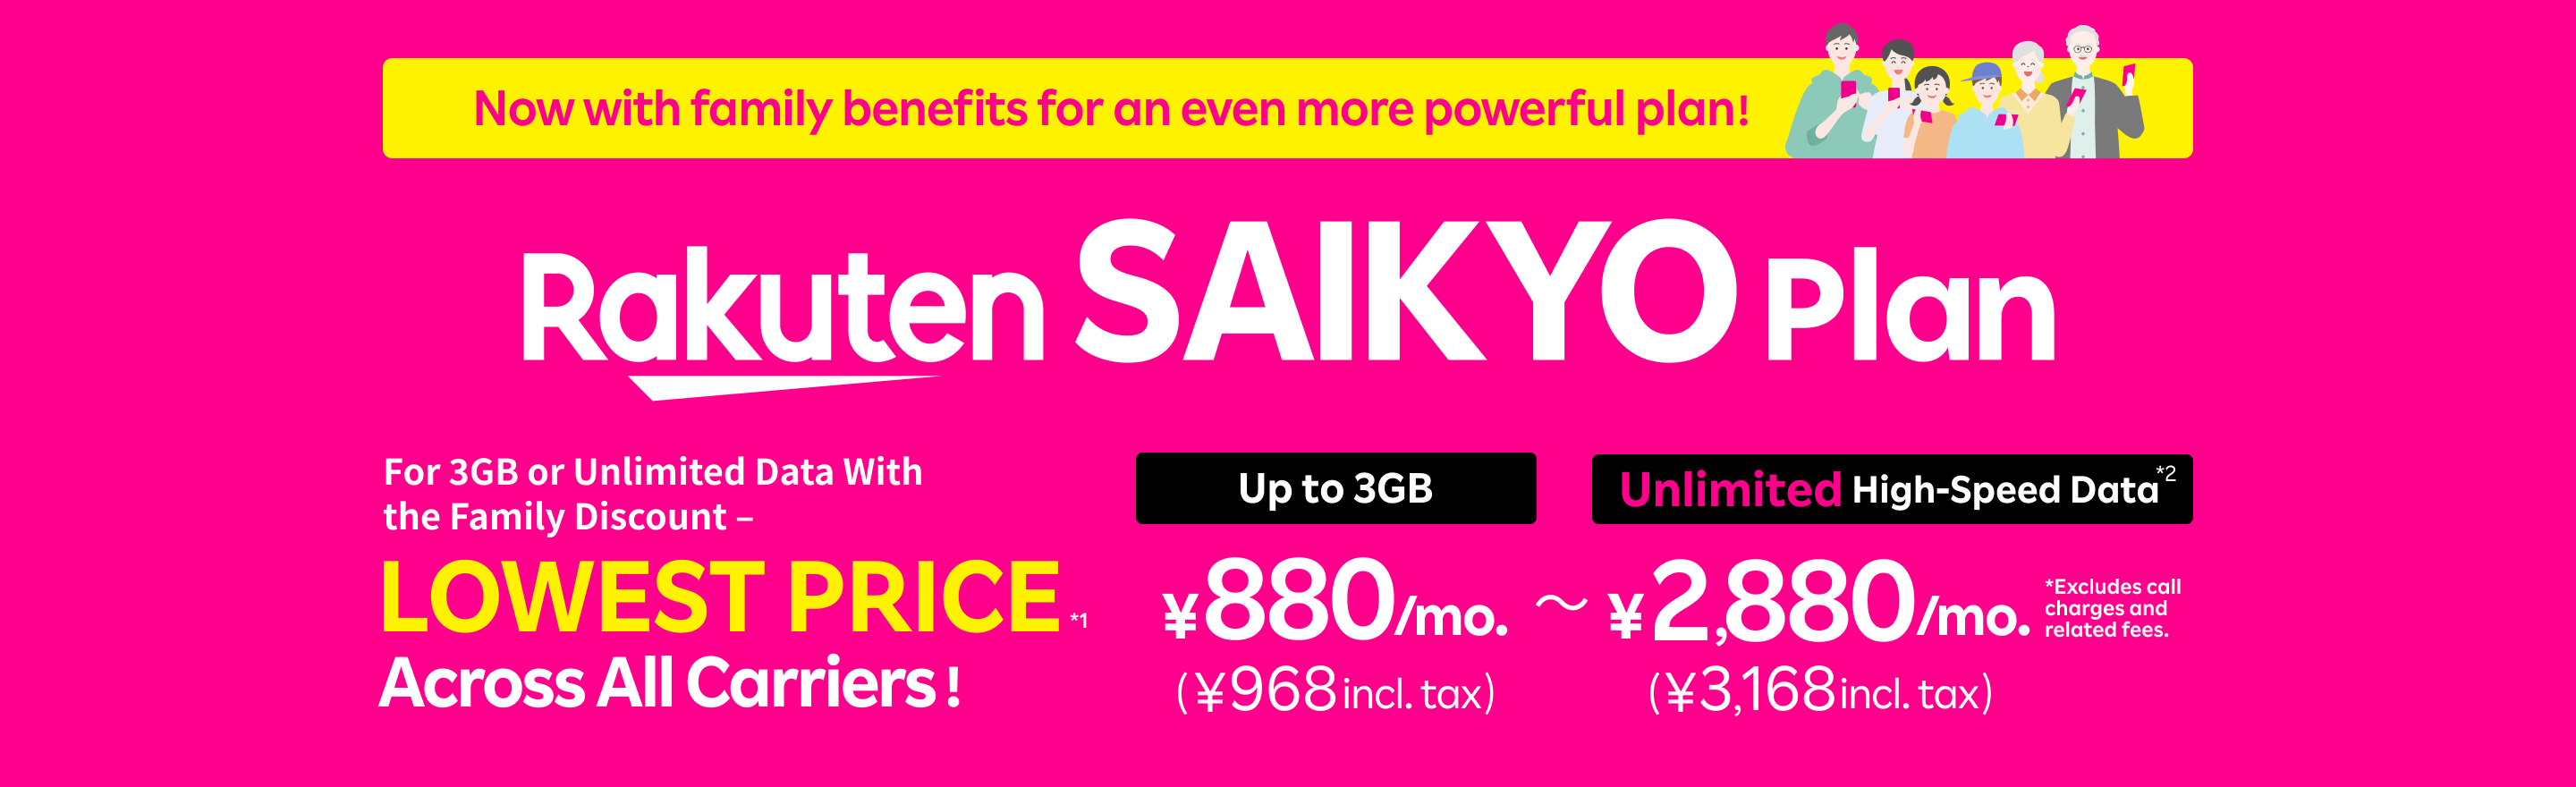 Now with added family benefits, making SAIKYO Plan even more powerful! Best deal for 3GB or unlimited data with the family discount – LOWEST PRICE across all carriers! 880 yen/mo. (968 yen incl. tax) up to 3GB, 2,880 yen/mo. (3,168 yen incl. tax) for unlimited high-speed data!